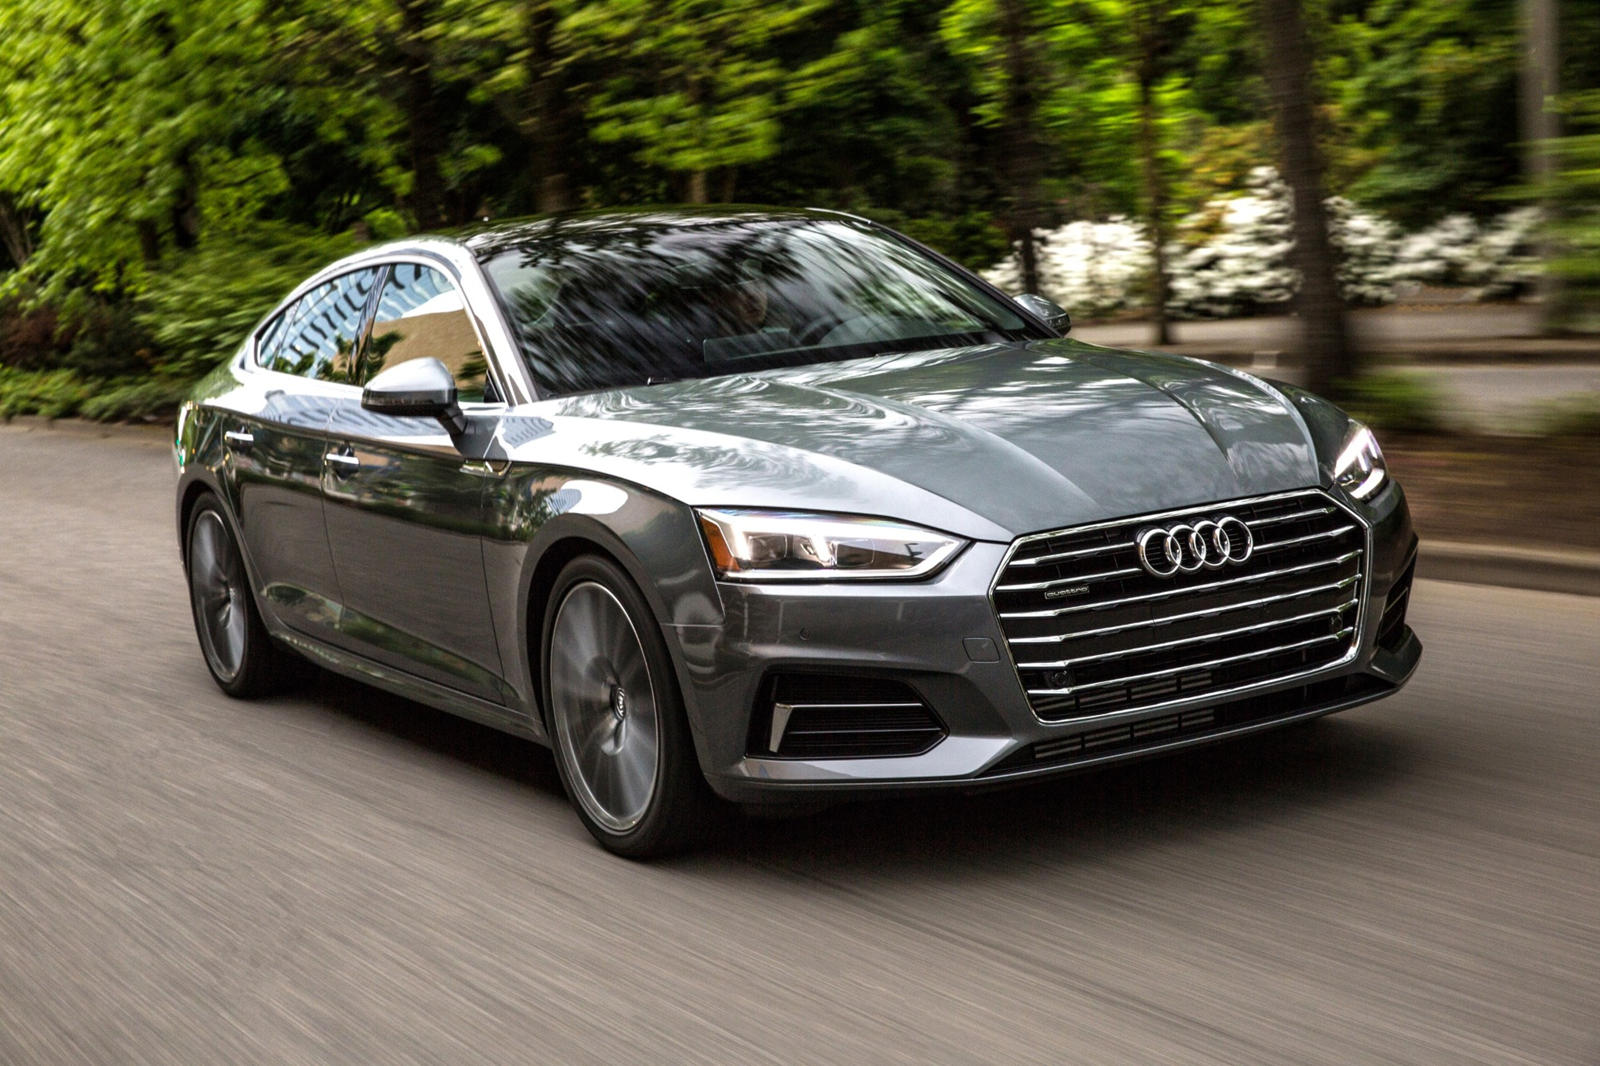 2019 Audi A5 : Latest Prices, Reviews, Specs, Photos and Incentives